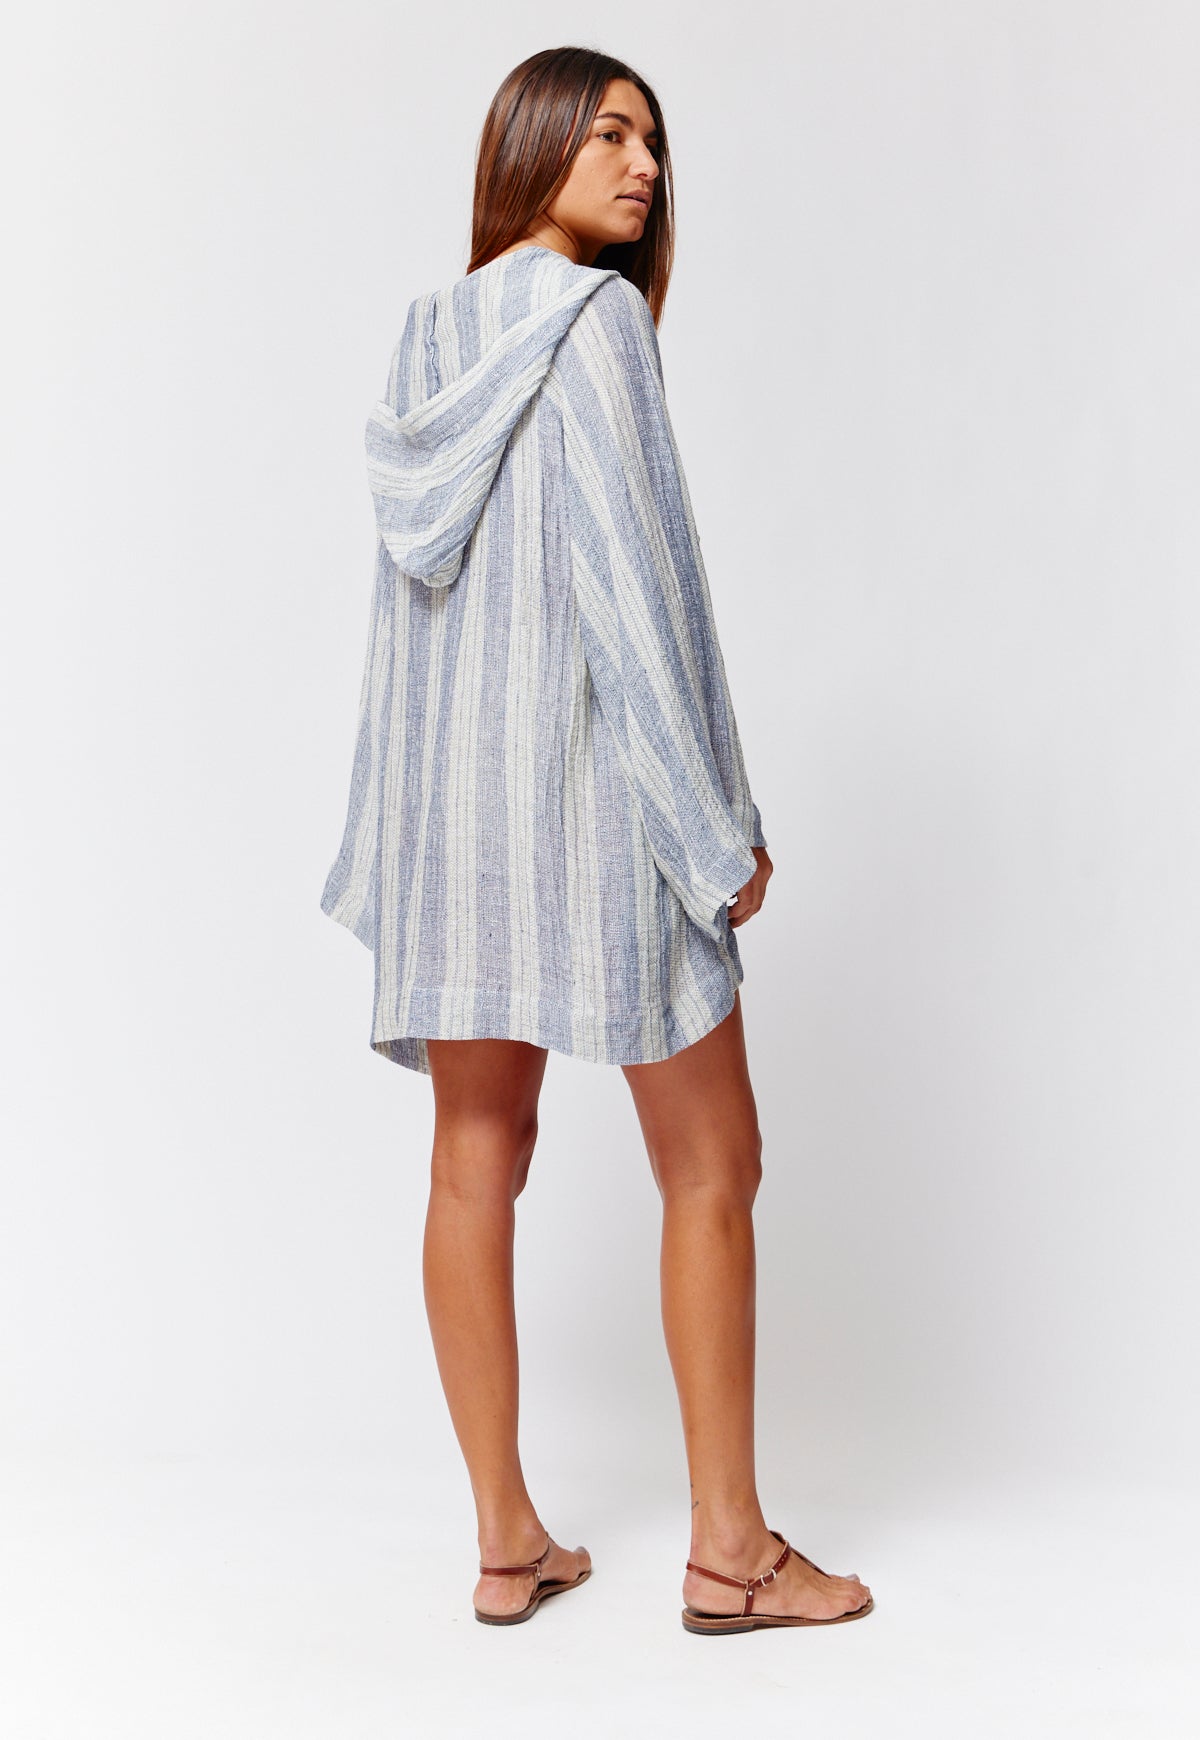 THE BEACH CAPE in NAVY & NATURAL STRIPED CHIOS GAUZE